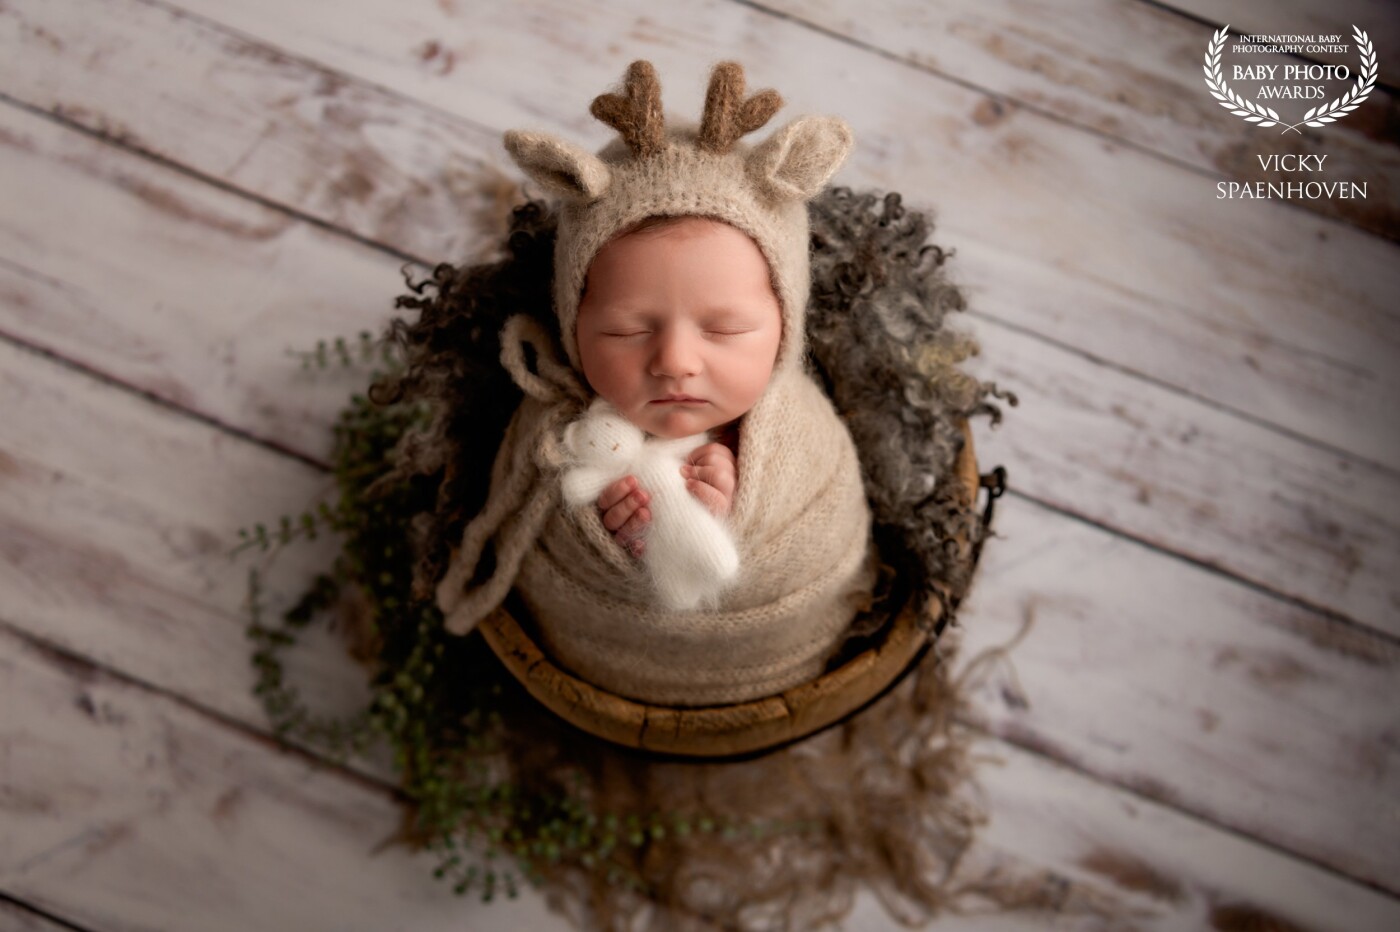 This setup is one of my most requested. The beautiful and warm color tones, the wrap, the hat, the little teddy, it all matches so well. I used one big light to create the soft light.